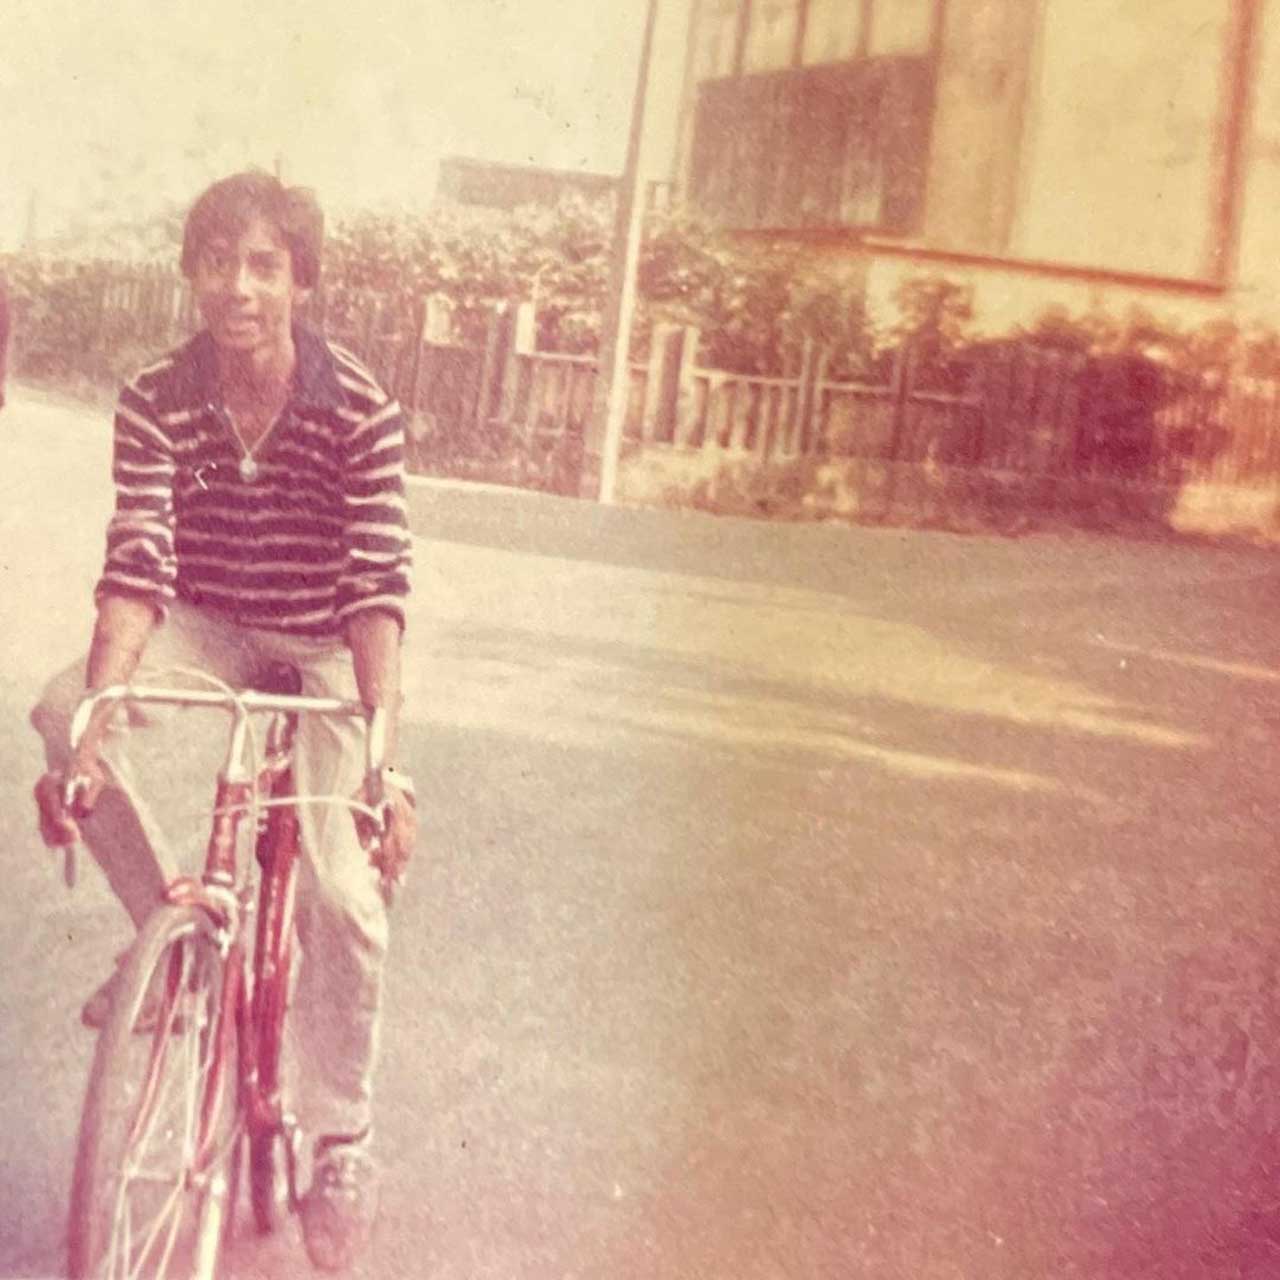 Filmmaker Madhur Bhandarkar took to his Instagram handle and posted a picture from his youthful days in which he can be seen riding a cycle. Along with it, he penned a heartfelt caption, recalling the days he used to work by delivering video cassettes. 